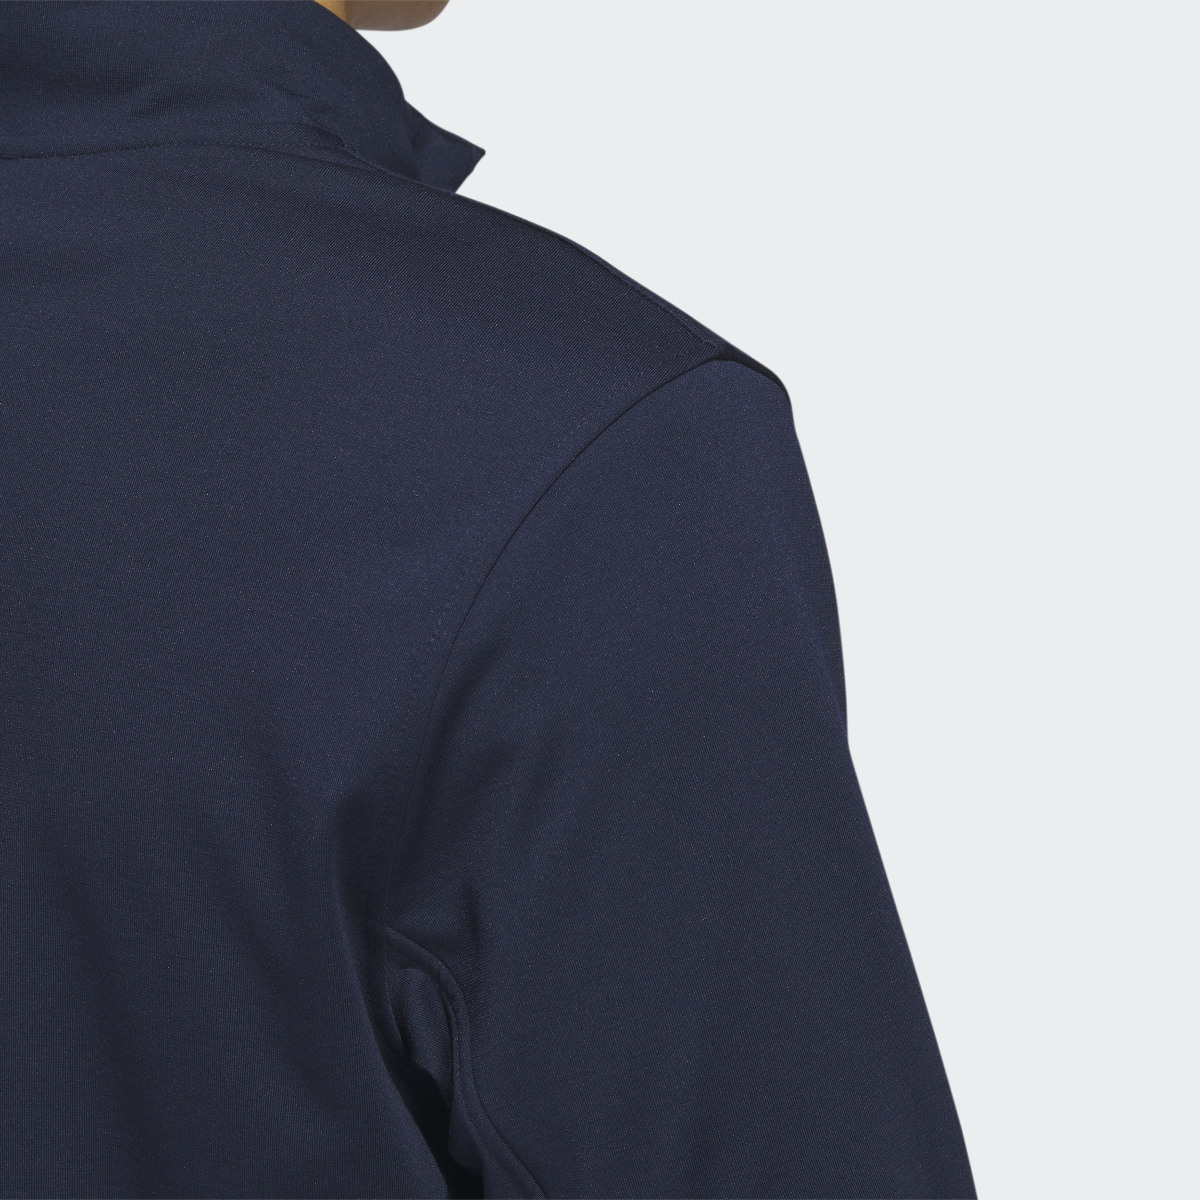 Adidas Elevated 1/4-Zip Pullover. 7